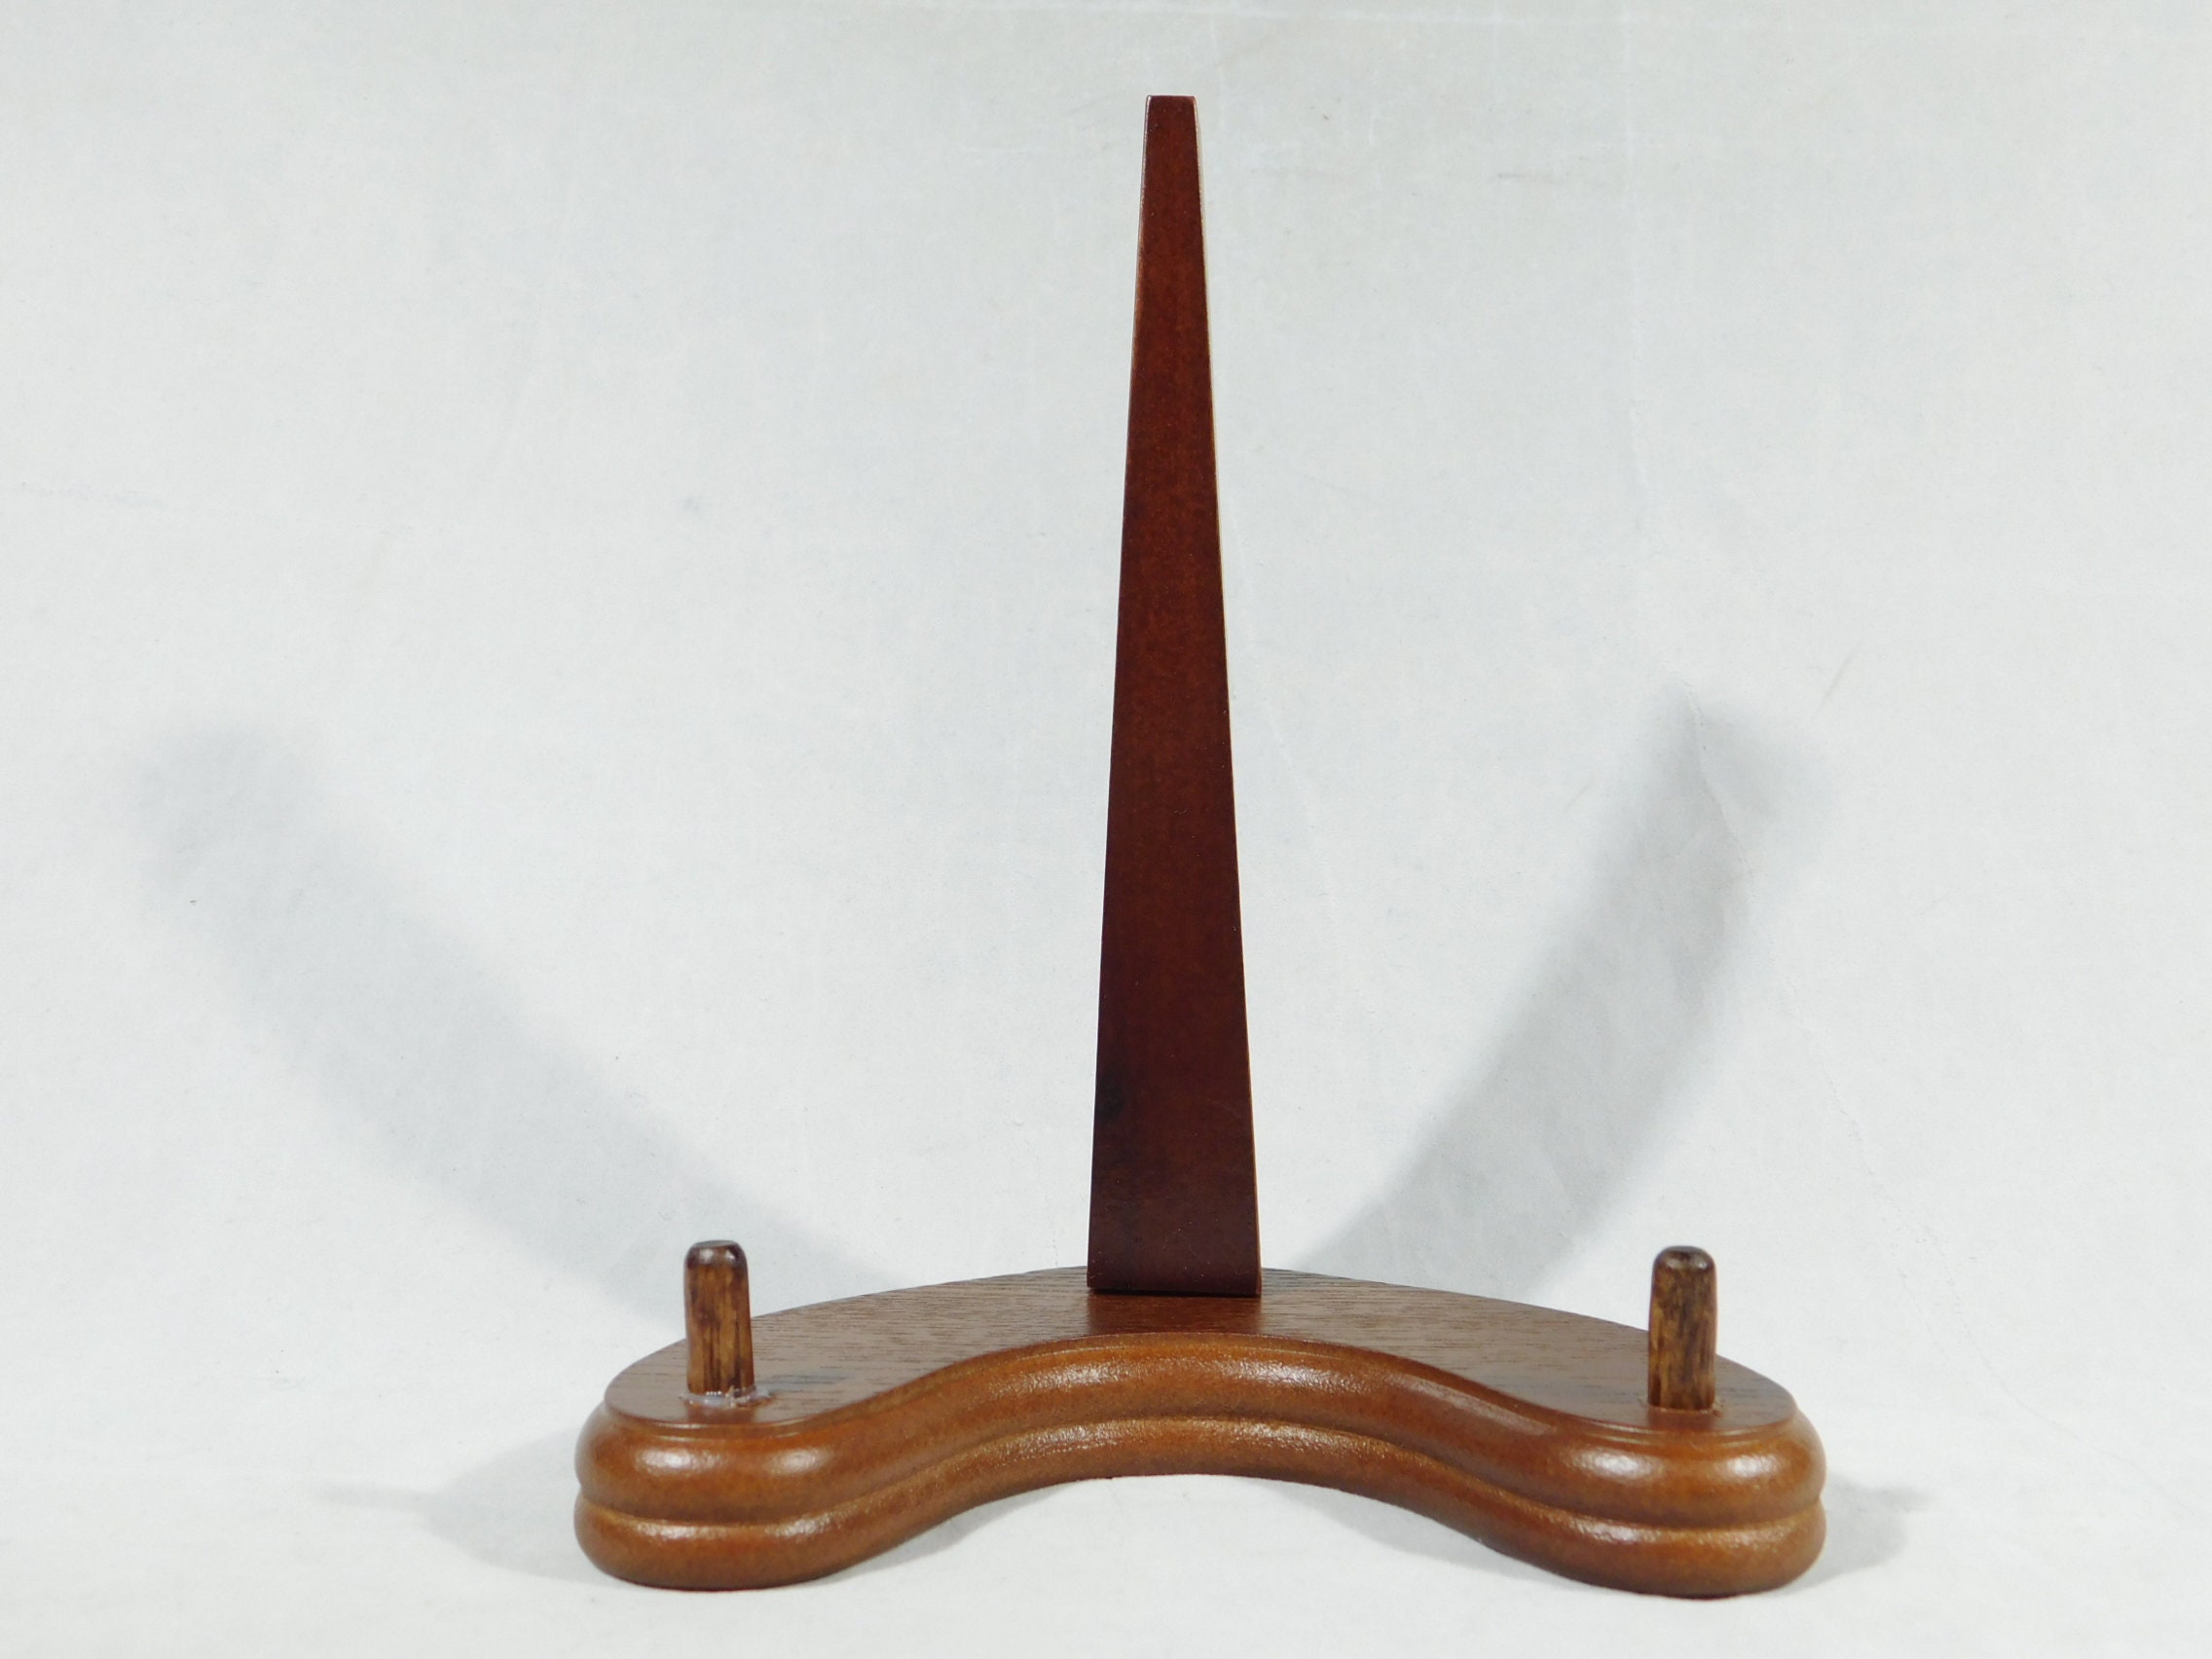 Easel Display Stand for Embroidery, Wood Holder for Small Art